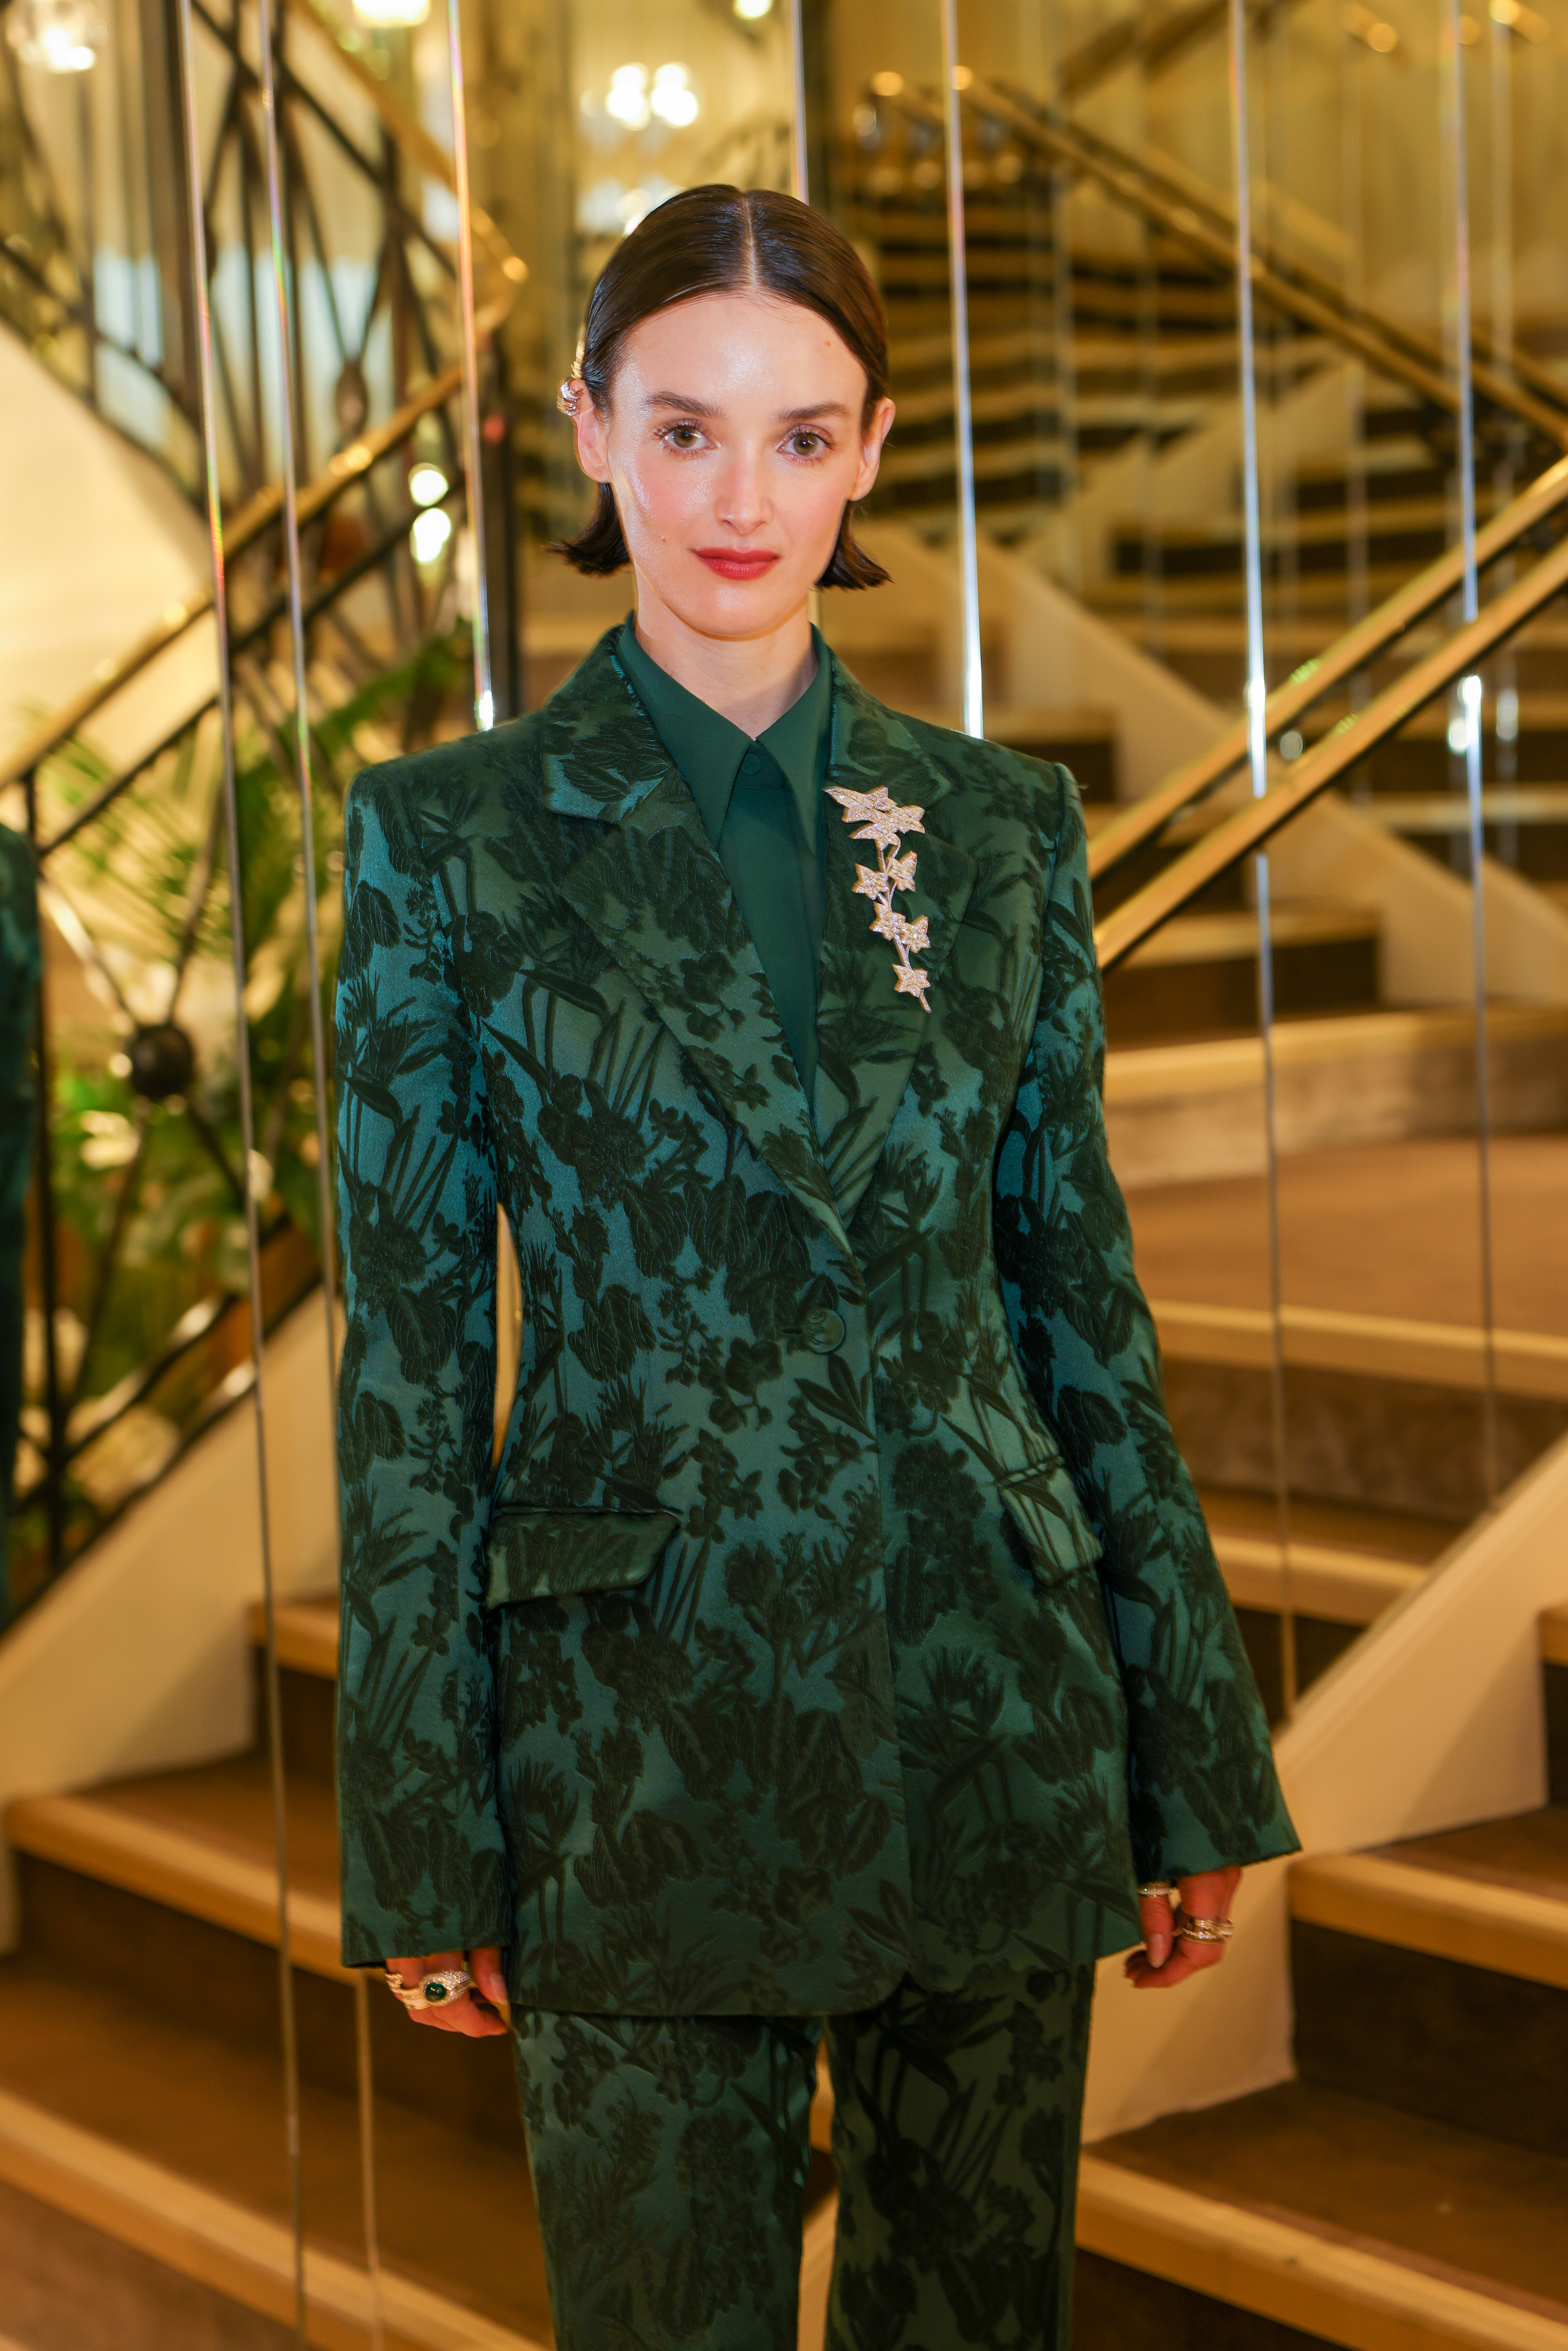 Woman in patterned green suit stands on staircase at event